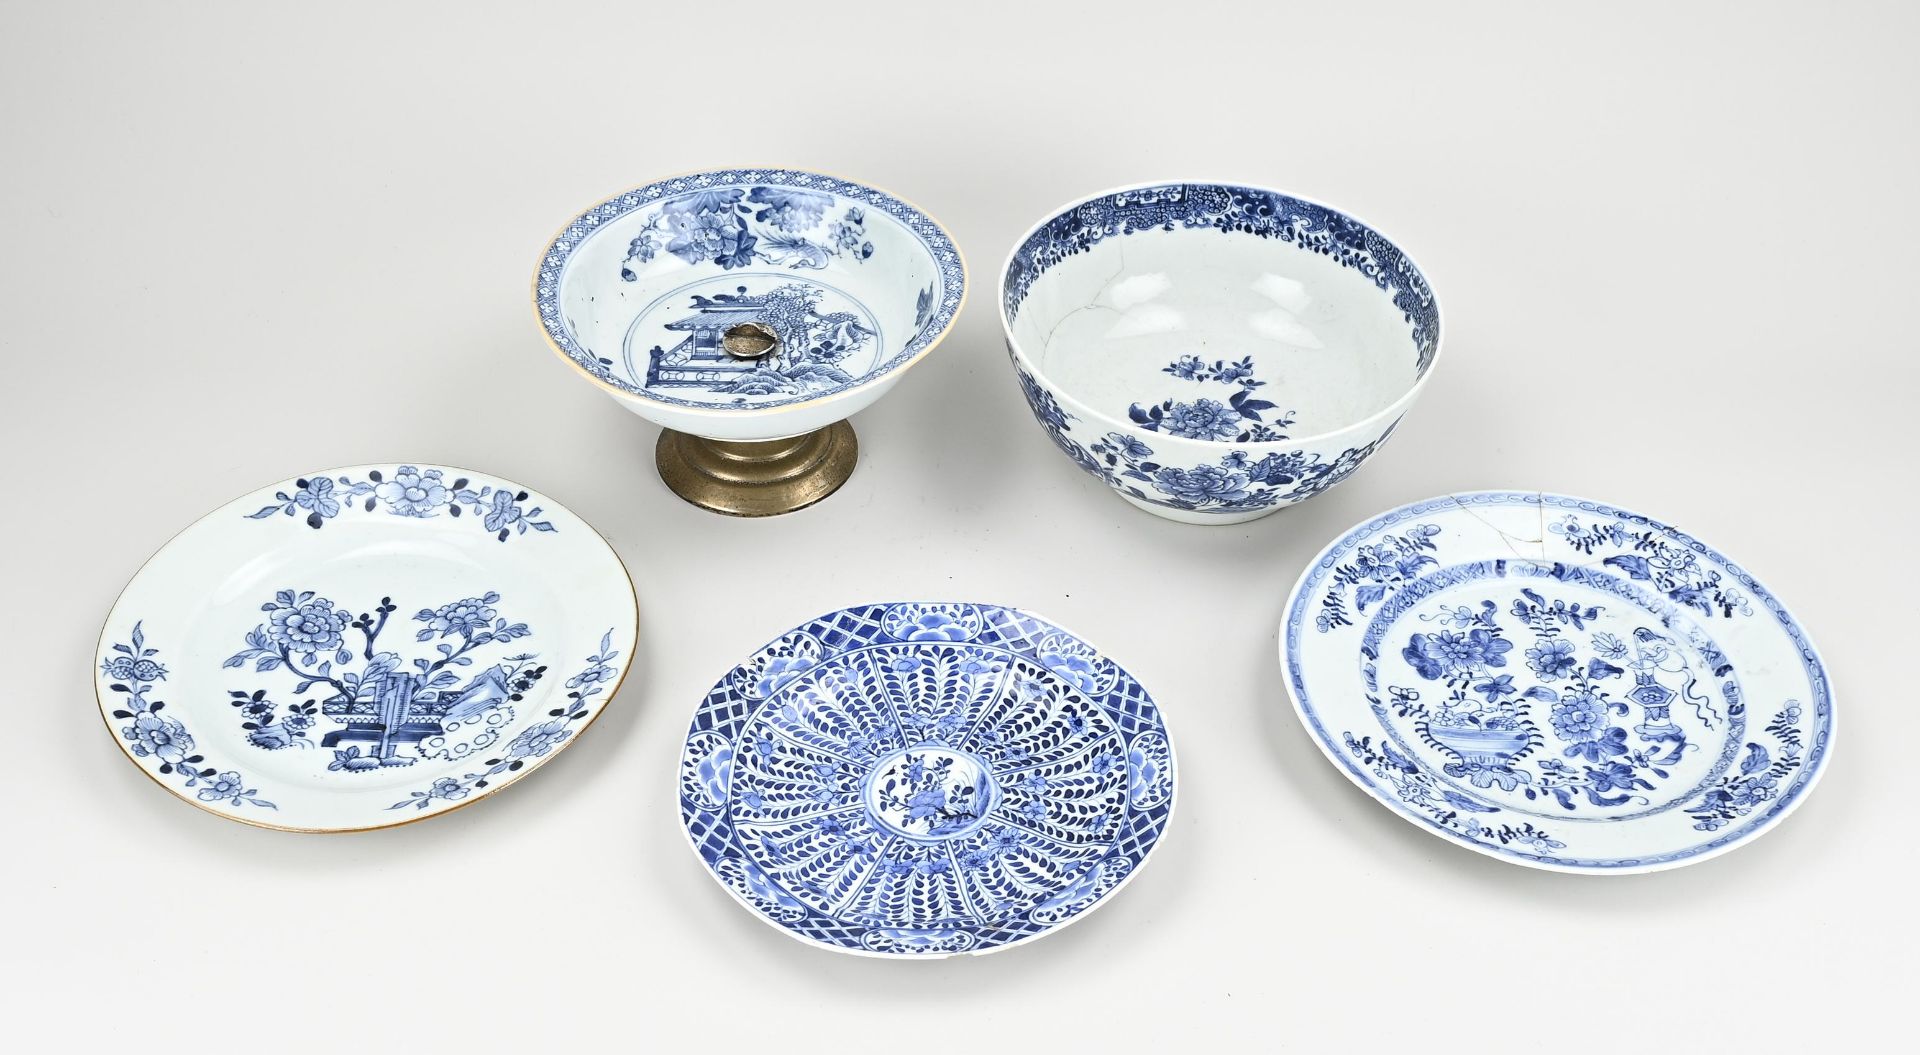 Five volumes of Chinese porcelain